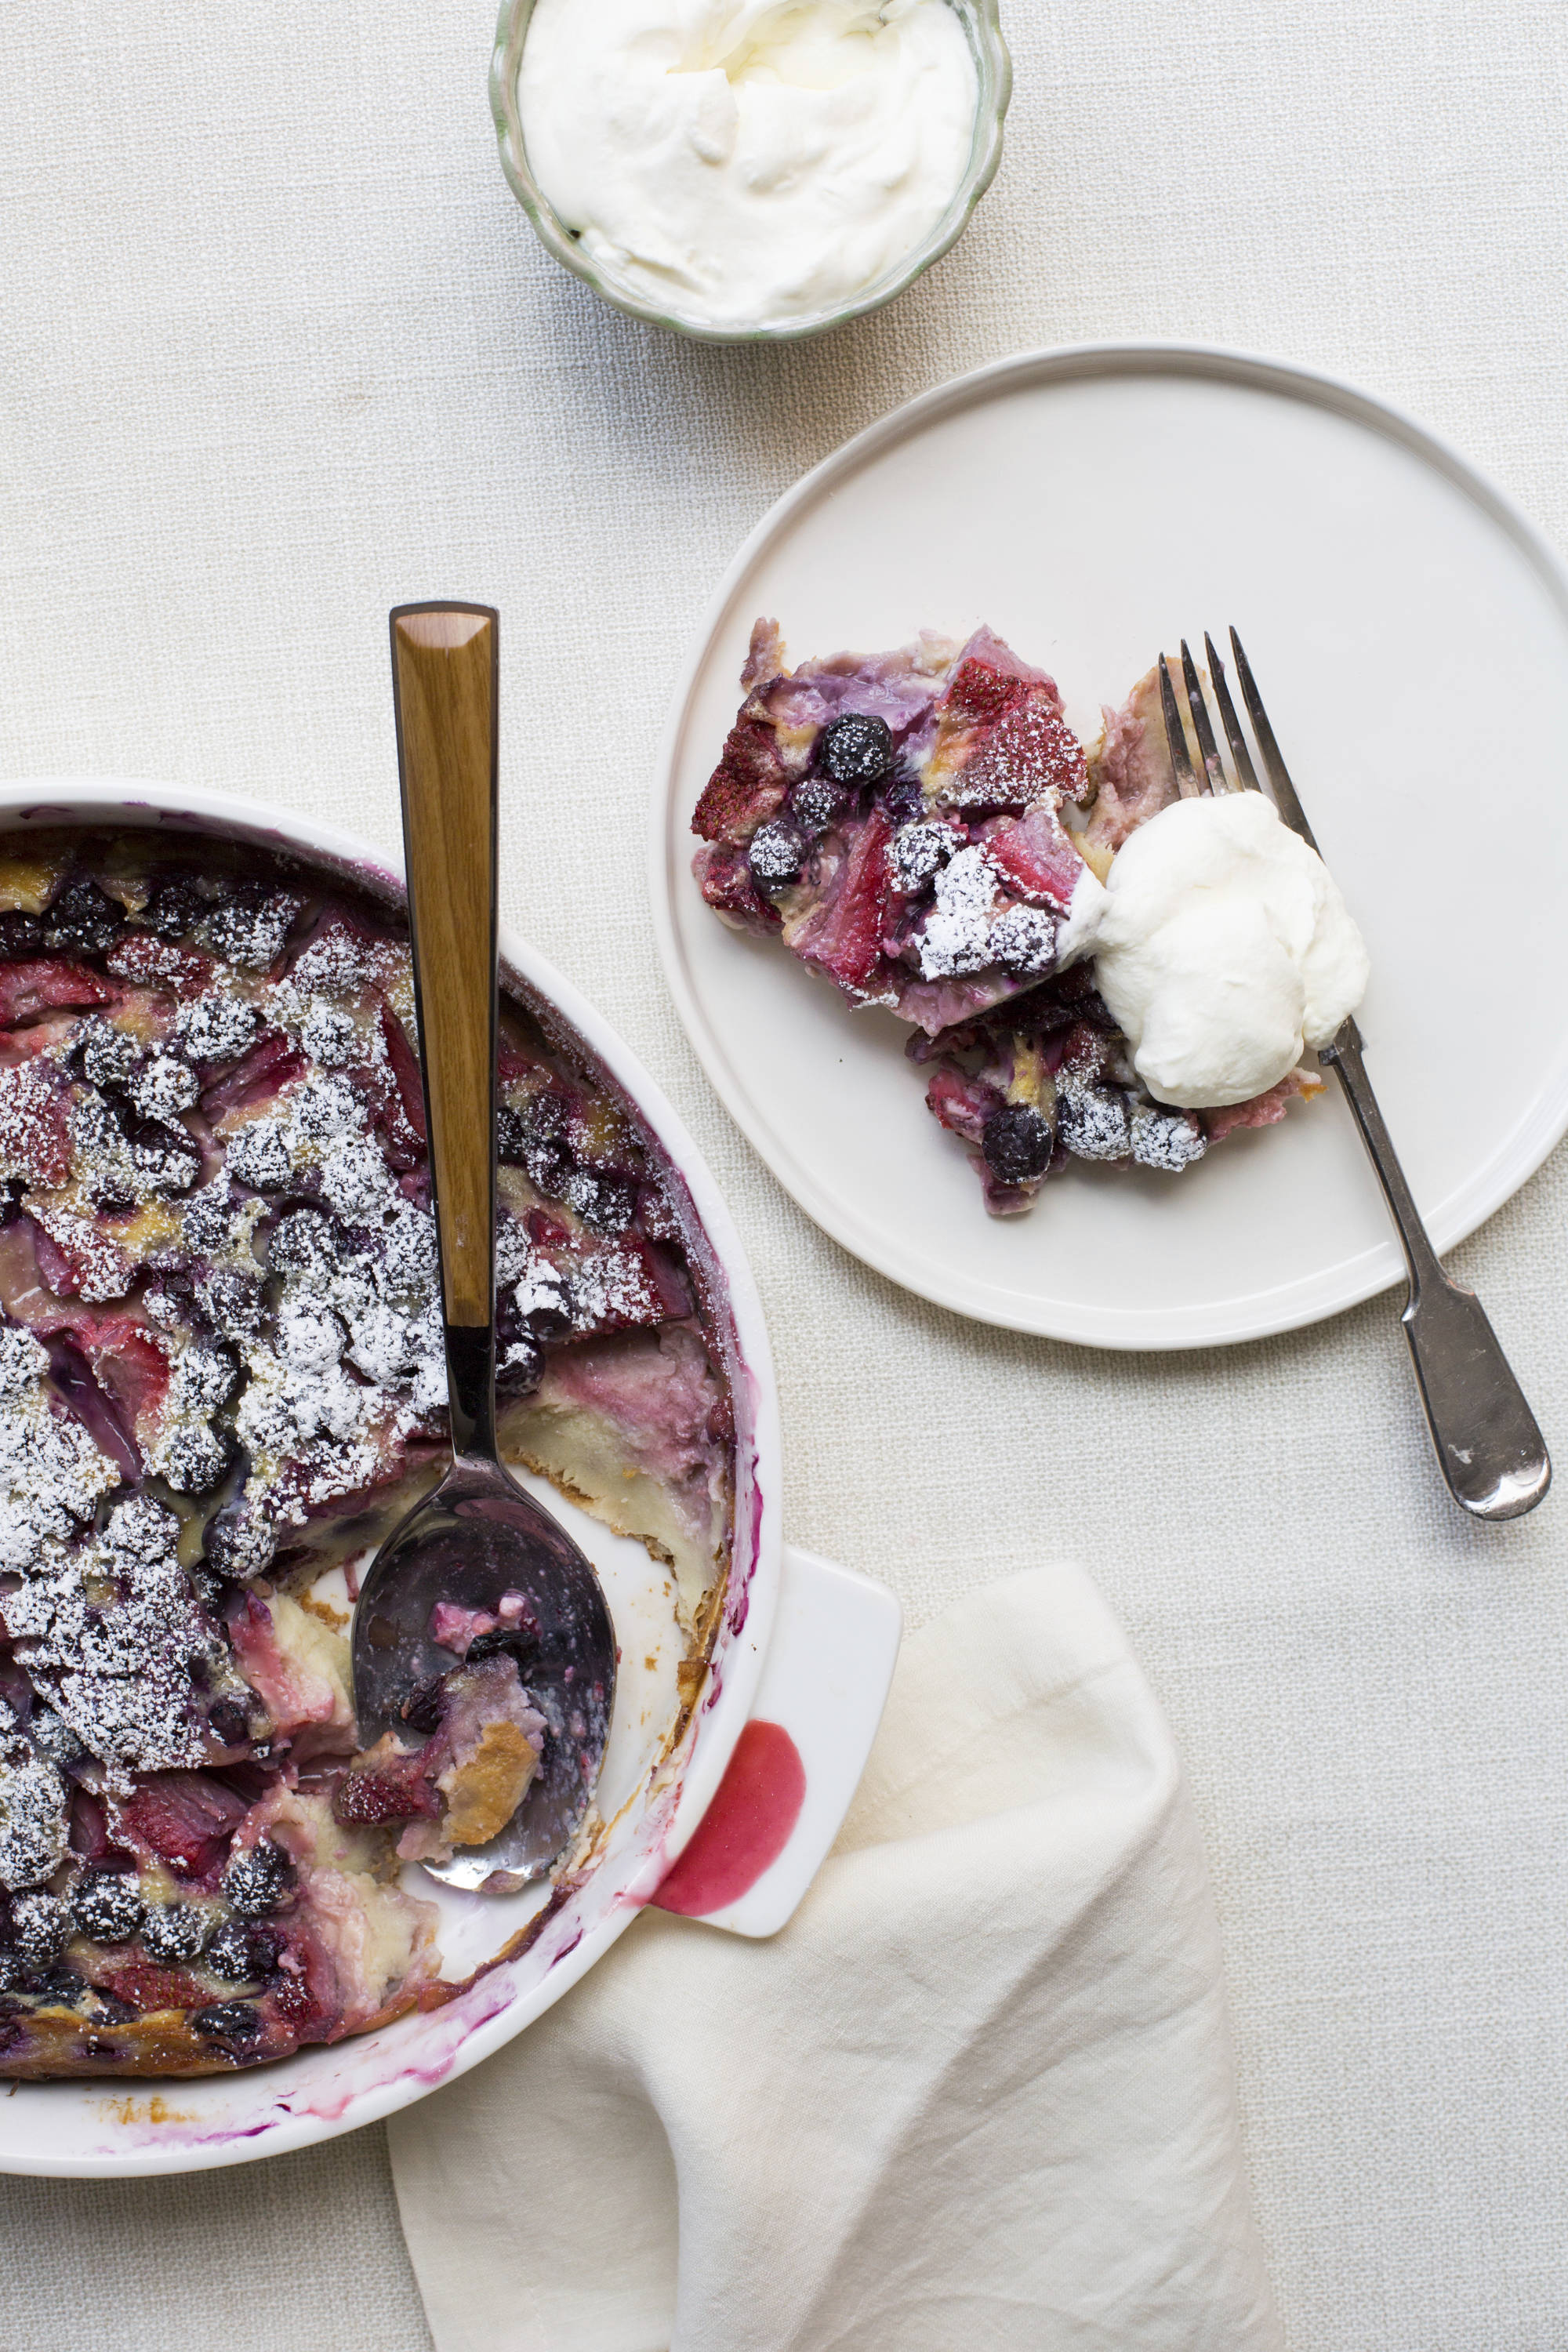 This June 1 photo shows a berry clafoutis in New York. This dish is from a recipe by Katie Workman. (Sarah E Crowder via AP)